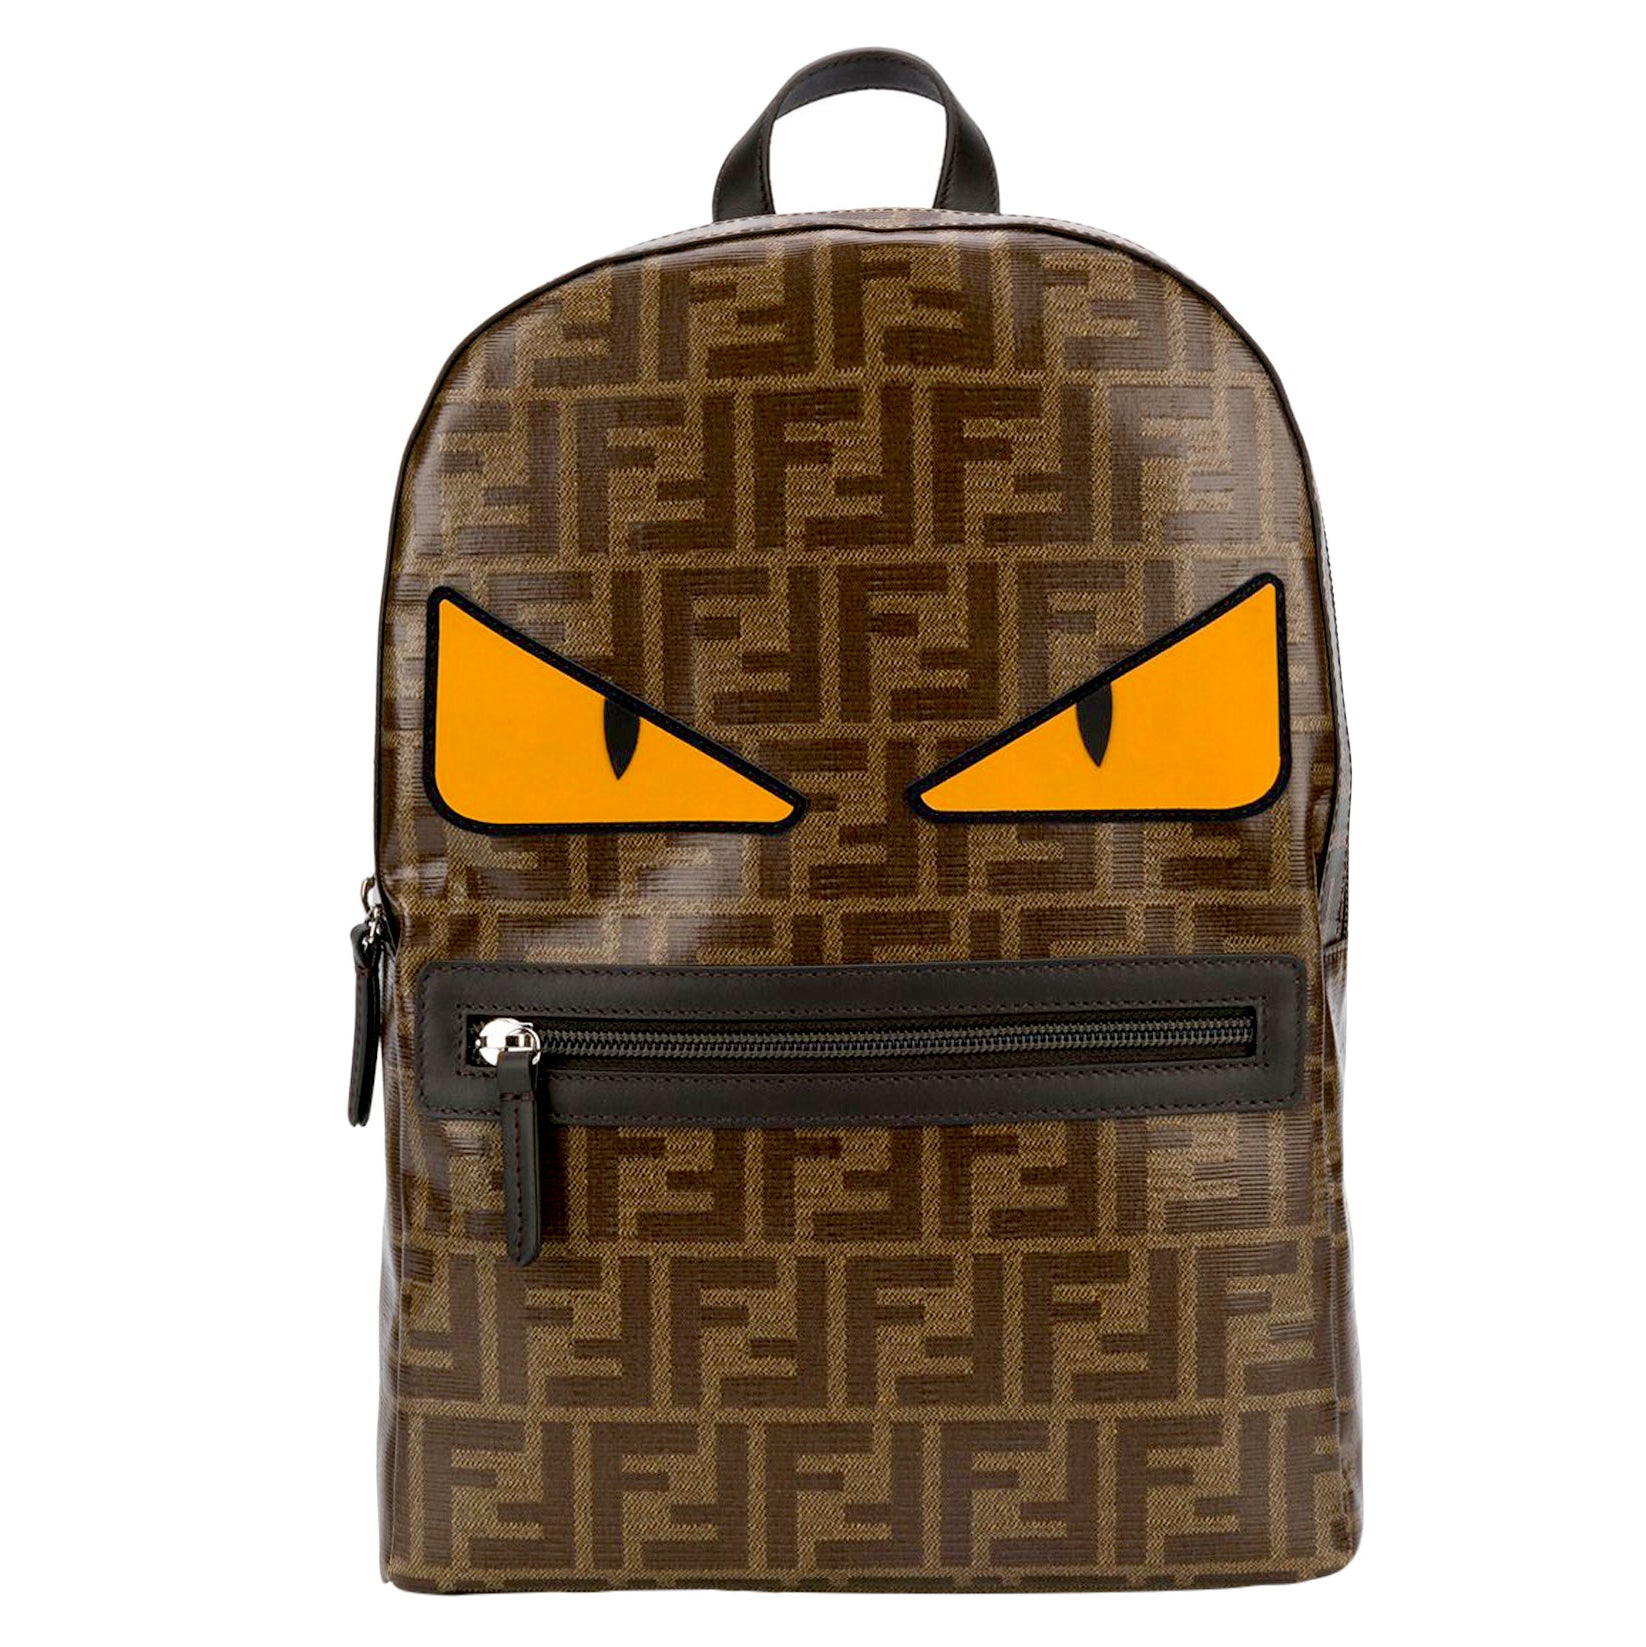 Designed to move with the body, the #Fendi Chiodo backpack is